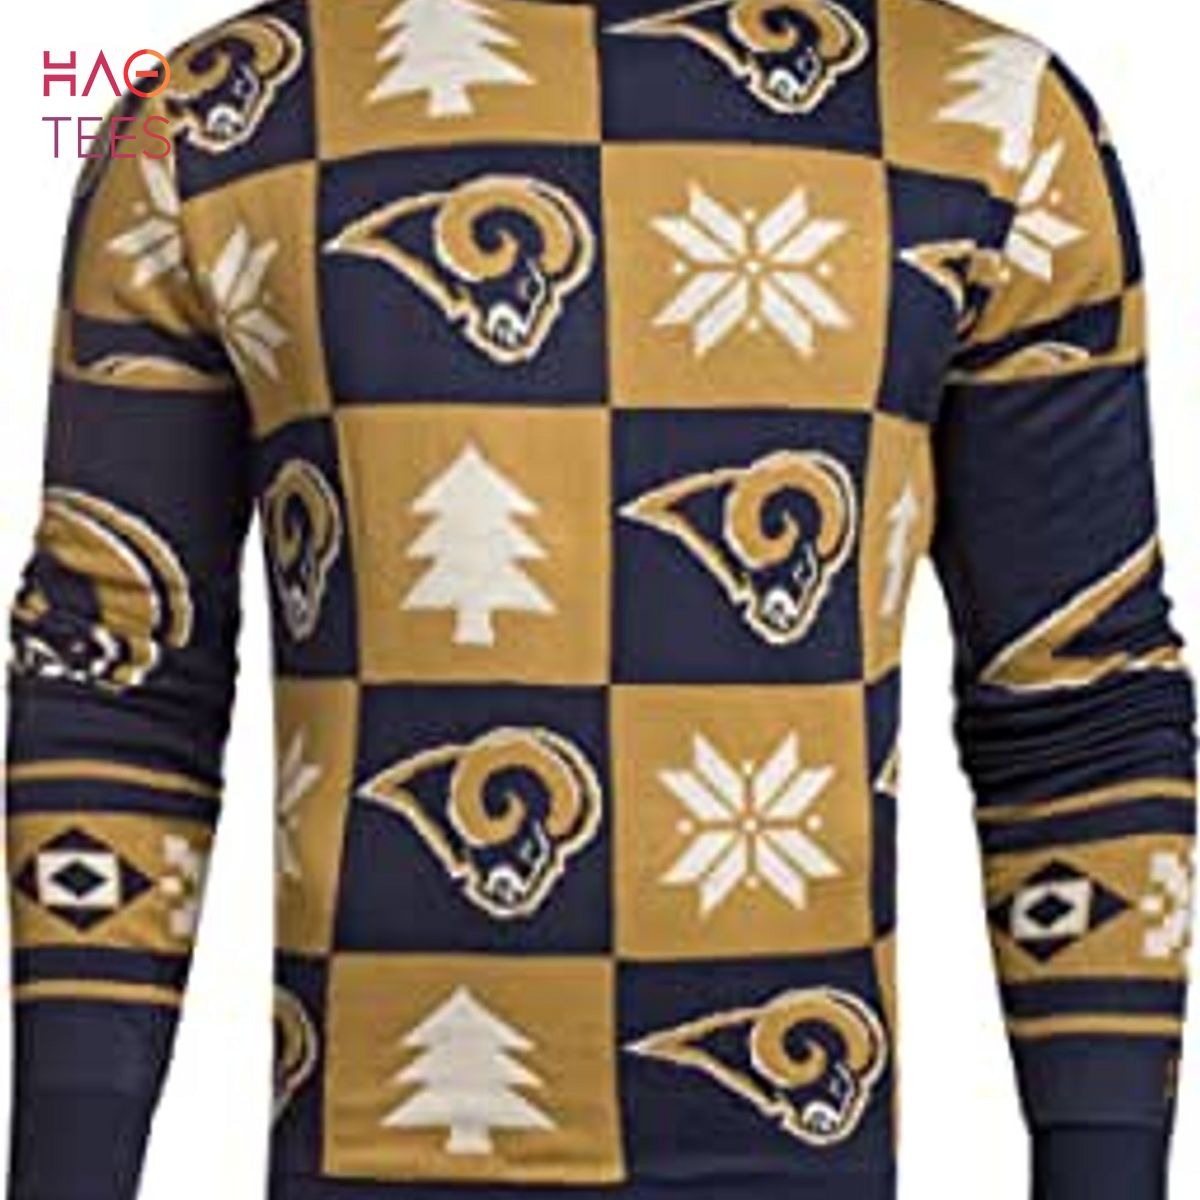 BEST Los Angeles Rams Patches NFL Ugly Crew Neck Sweater by Forever Collectibles